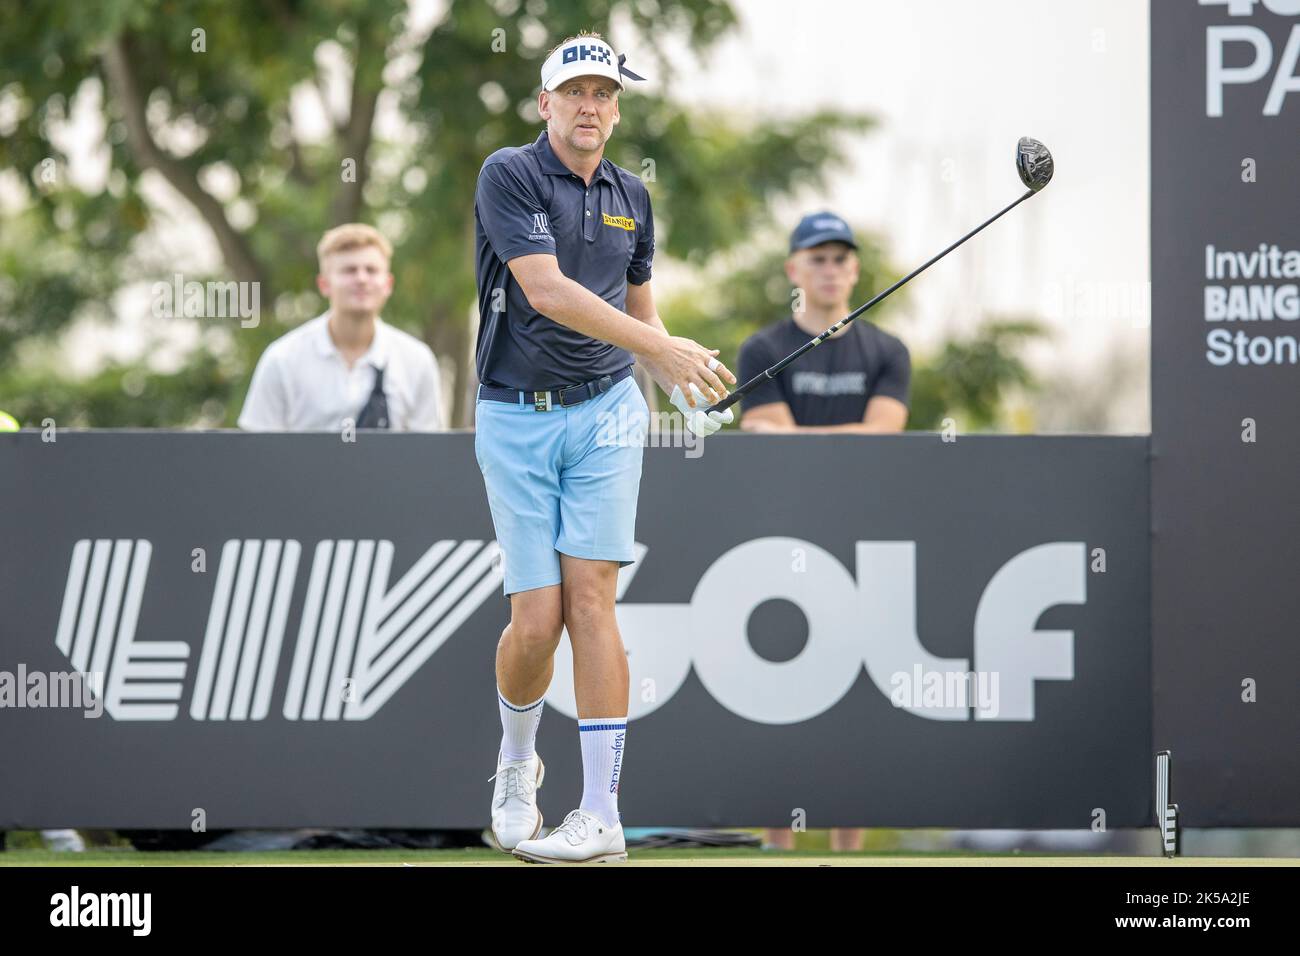 BANGKOK, THAILAND - OCTOBER 7: Ian Poulter of England on hole 8 during the first round at the LIV GOLF INVITATIONAL BANGKOK at Stonehill Golf Course on October 7, 2022 in Bangkok, THAILAND (Photo by Peter van der Klooster/Alamy Live News) Stock Photo